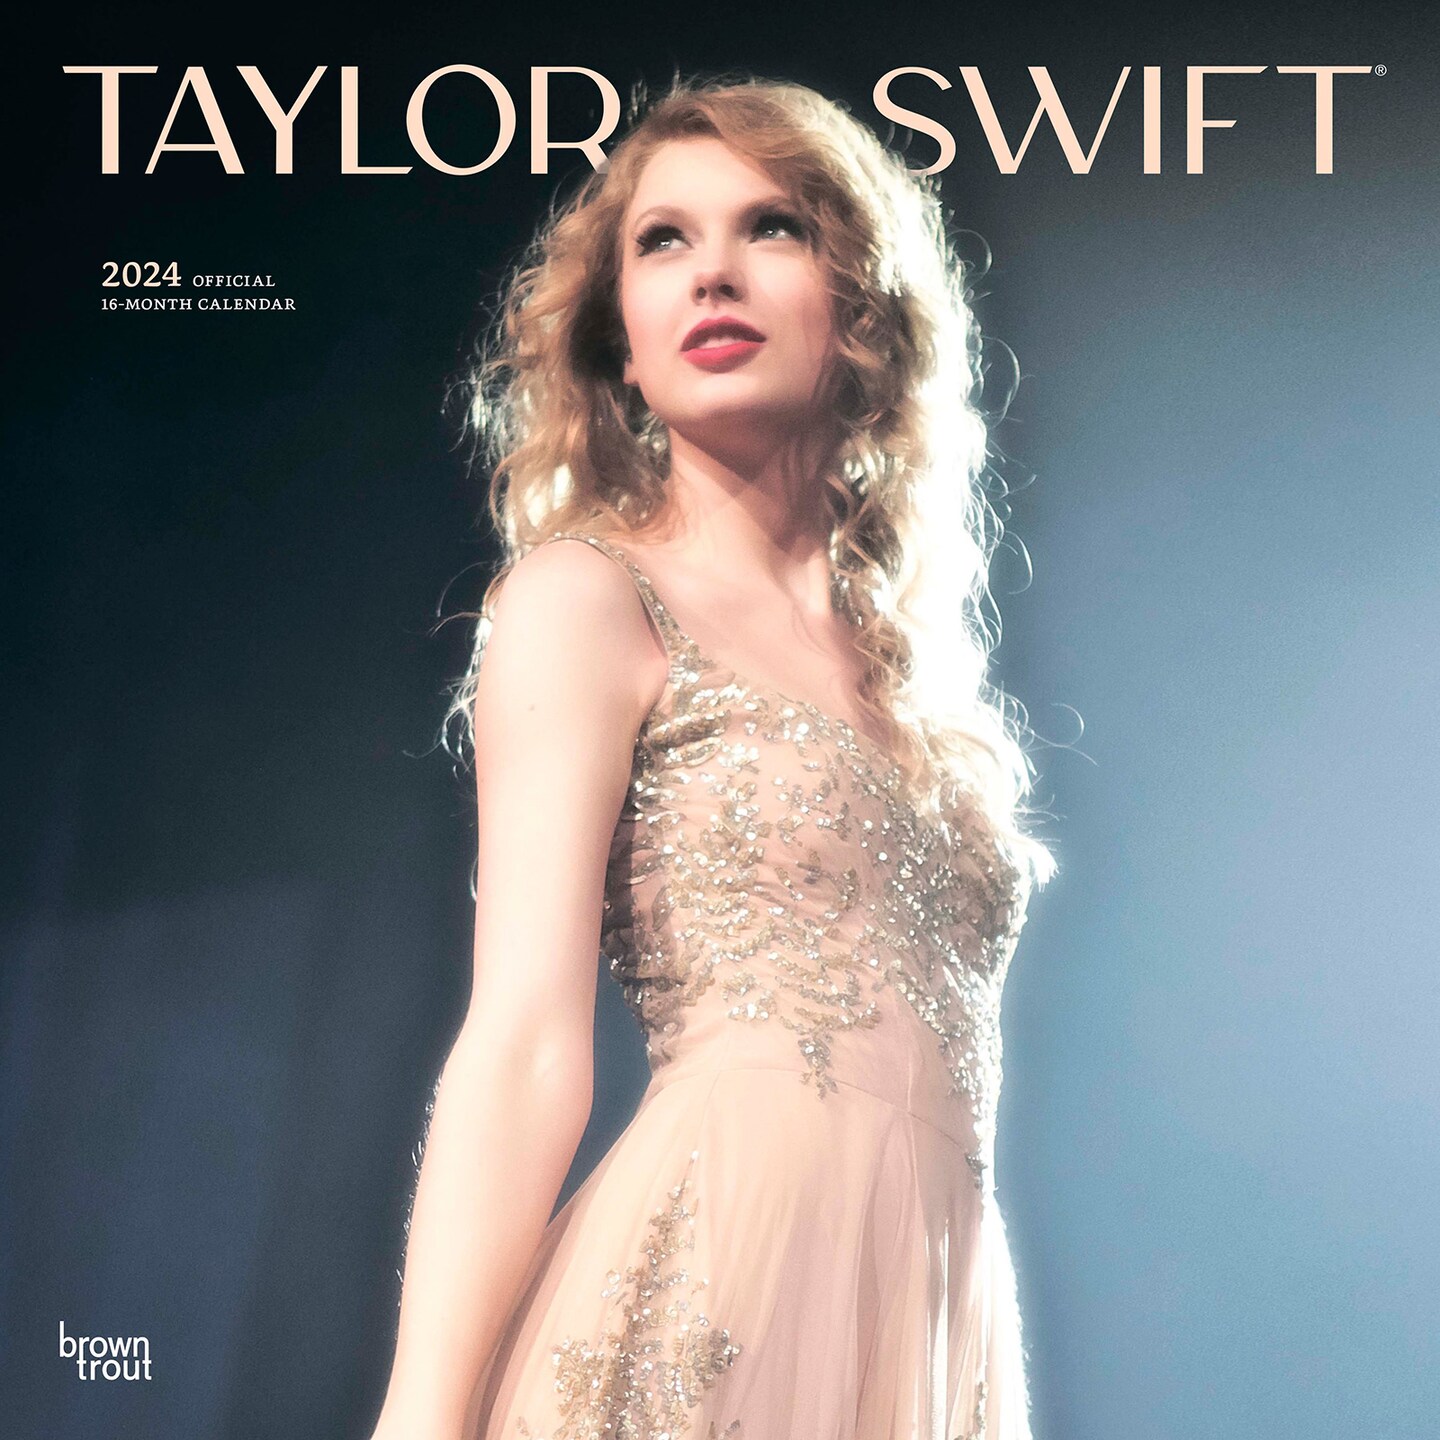 Taylor Swift Diamond Painting  Taylor swift posters, Taylor swift